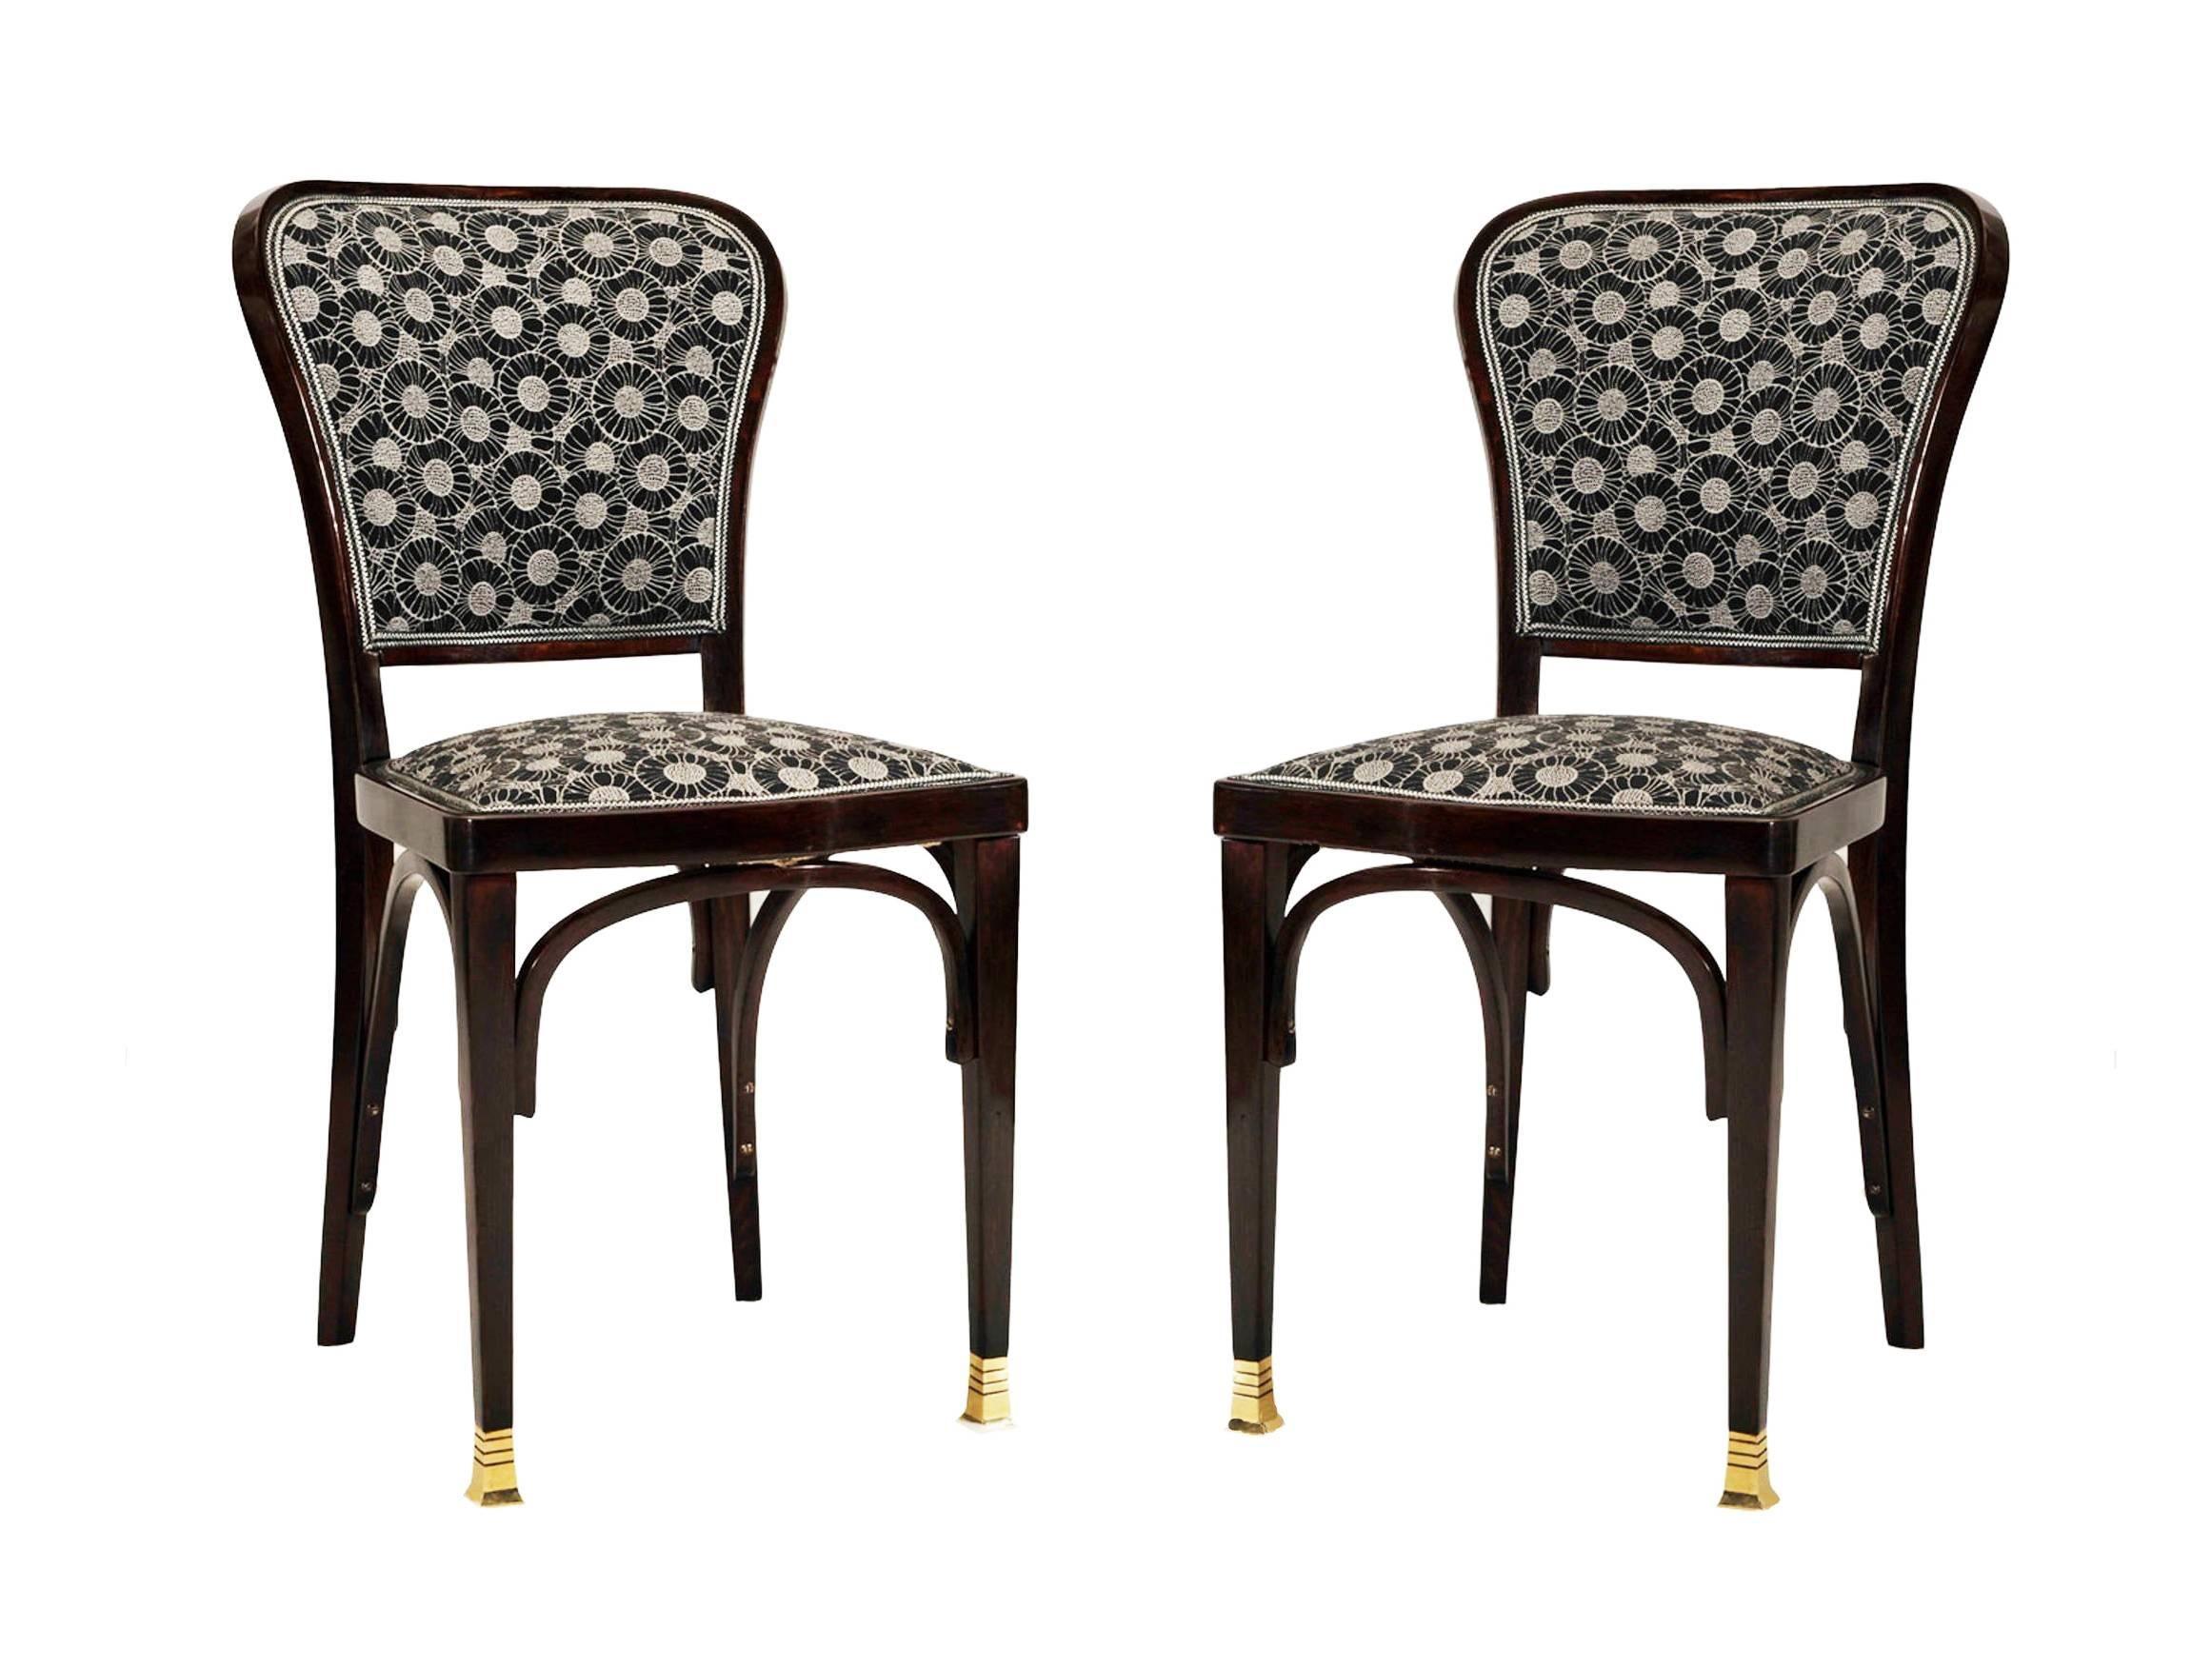 Dining room chairs by Gustav Siegel for J.J. Kohn from 1901.
This model was first time appeared in the supplement to the 1902 Kohn catalog.
Fully restored and covered with Backhausen fabric.
One already restored delivery time for the rest about